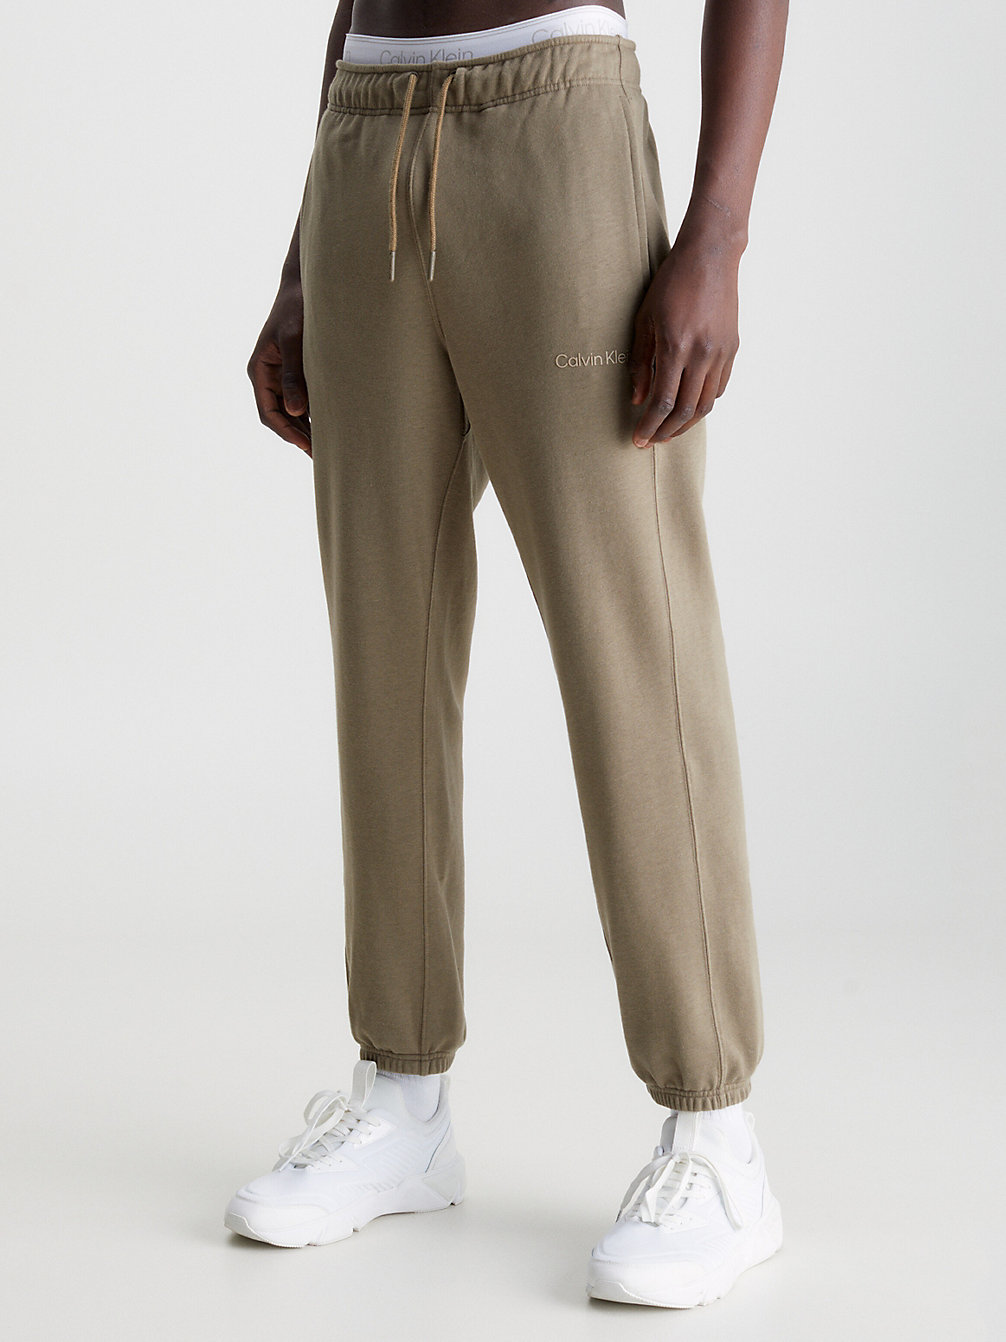 GRAY OLIVE Cotton Terry Joggers undefined men Calvin Klein